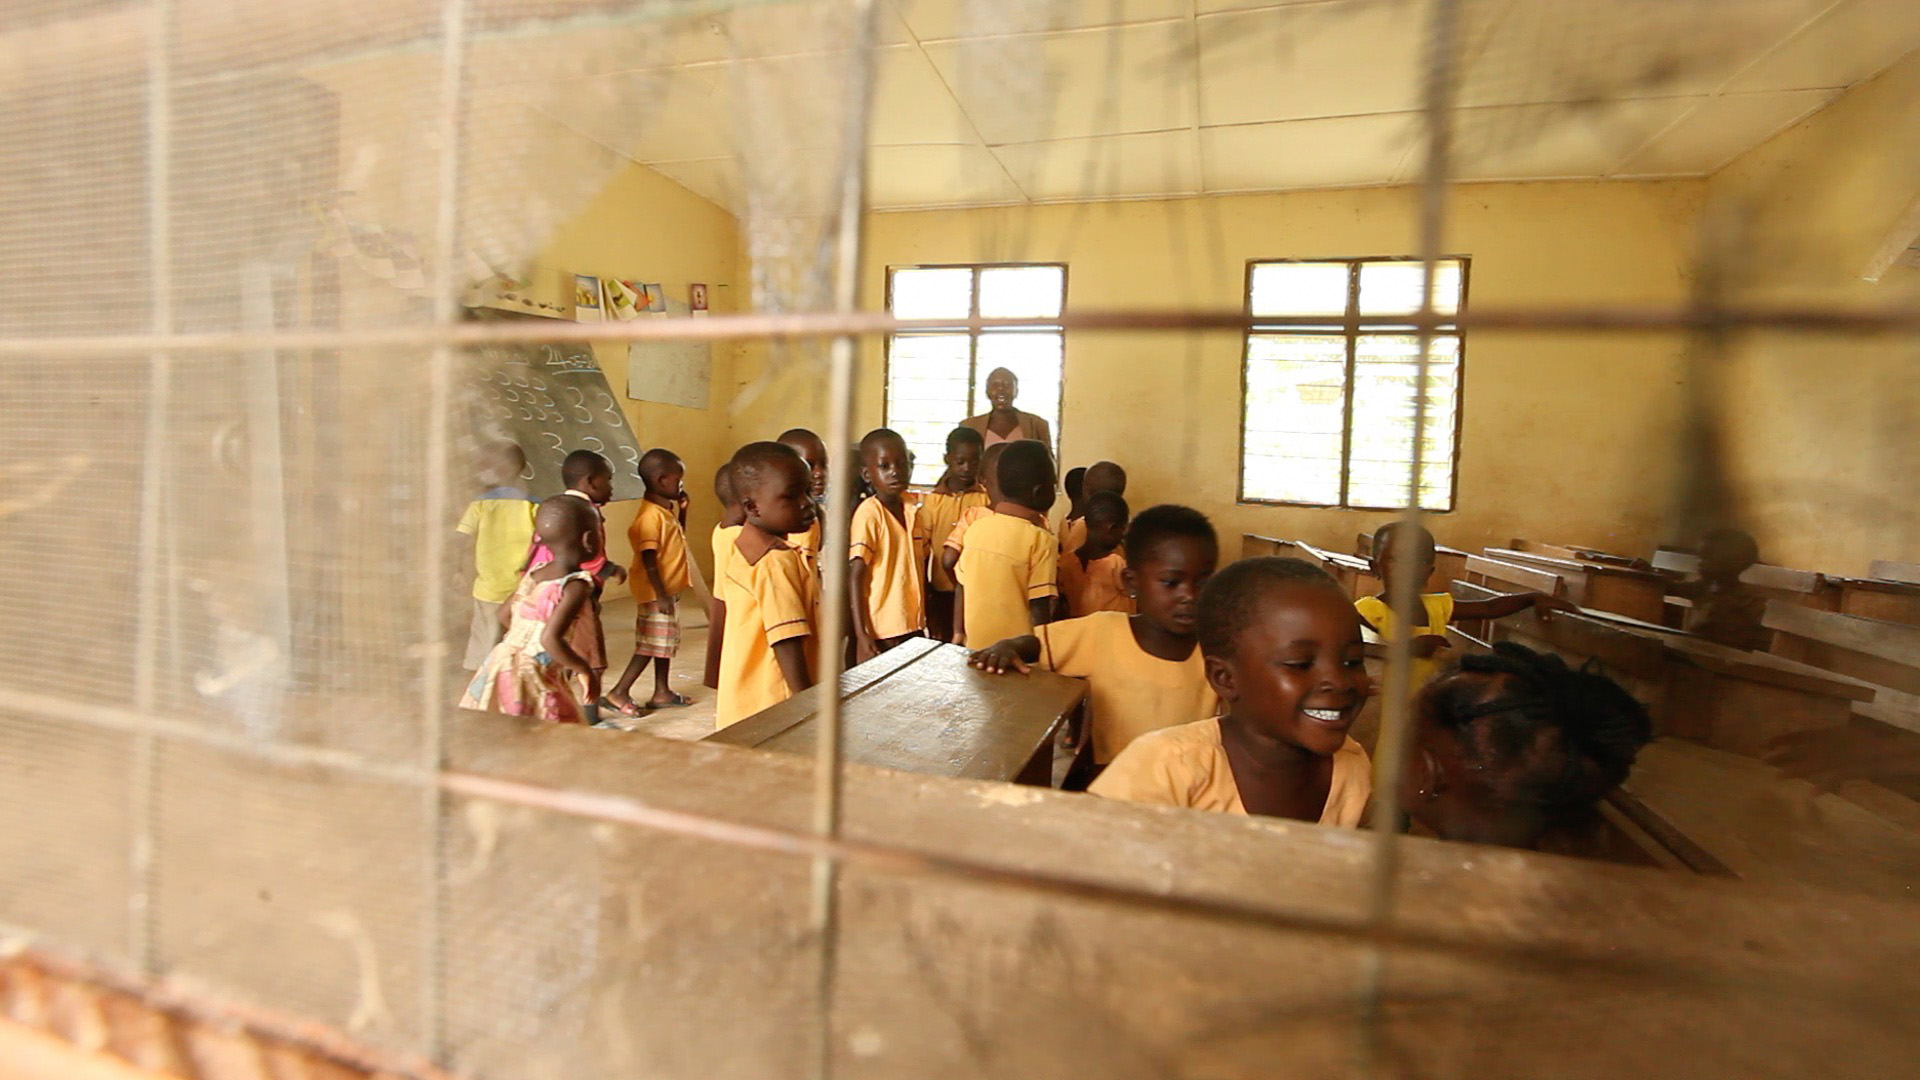 Findings: What Teachers and Proprietors are Saying about their Readiness and Preparedness for School Reopening in Ghana